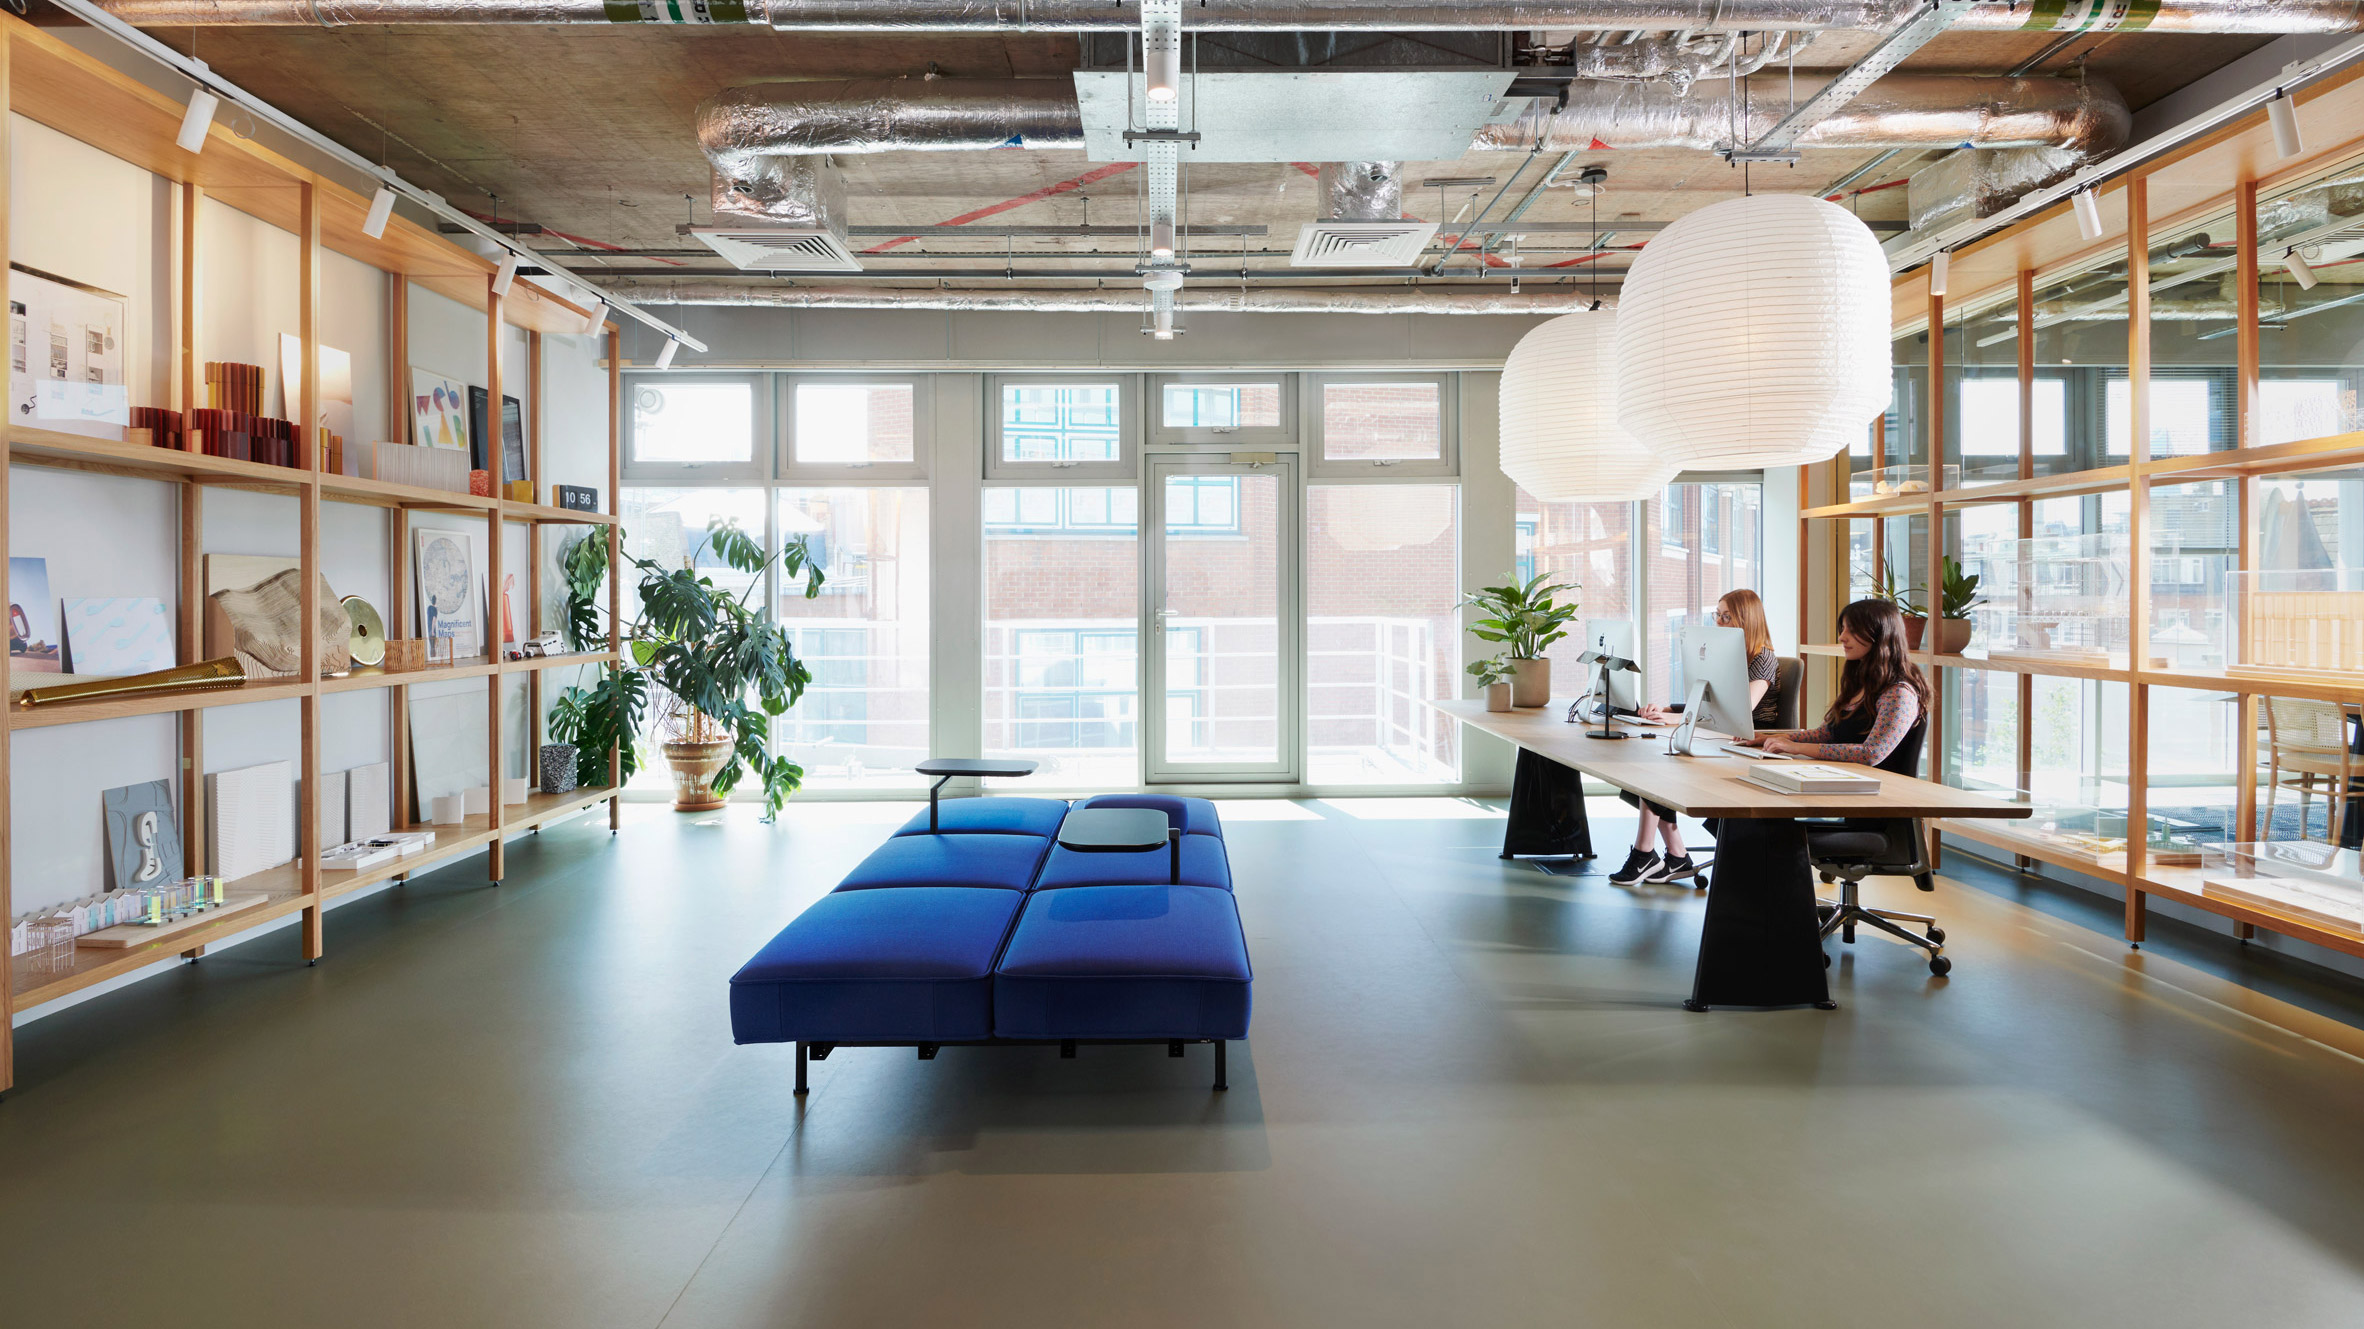 Universal Design Studio and Map relocate to Clerkenwell office